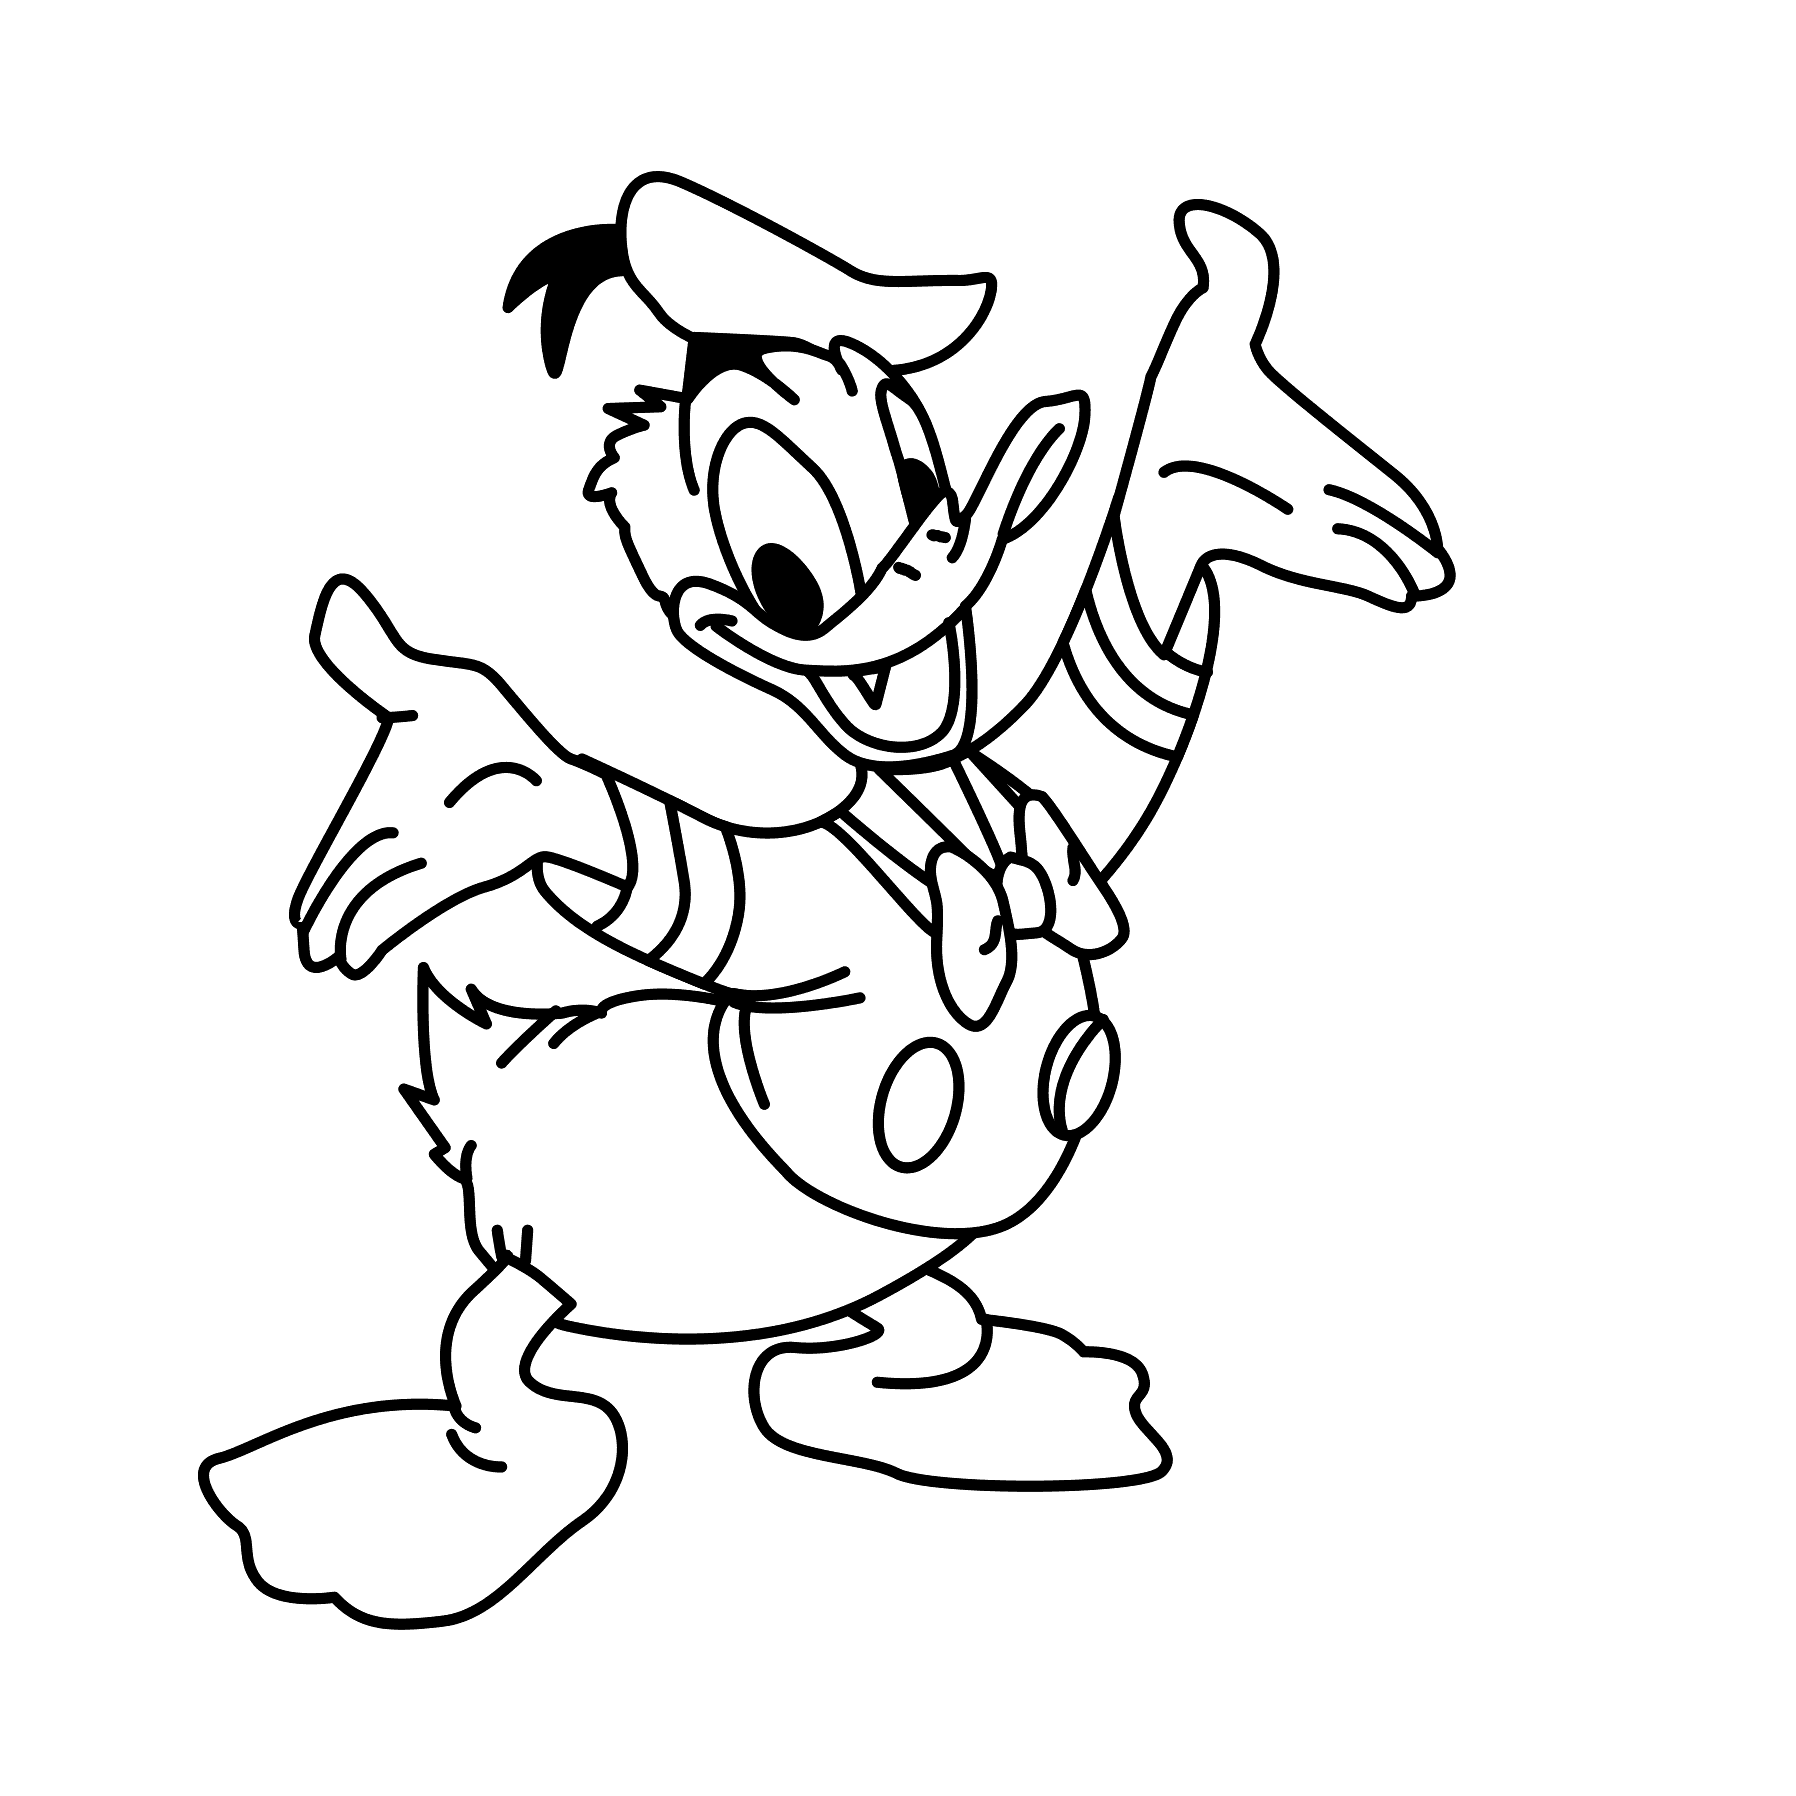 Simple Donald Coloring Page To Download For Free Cartoon Coloring Pages Drawings Duck Drawing